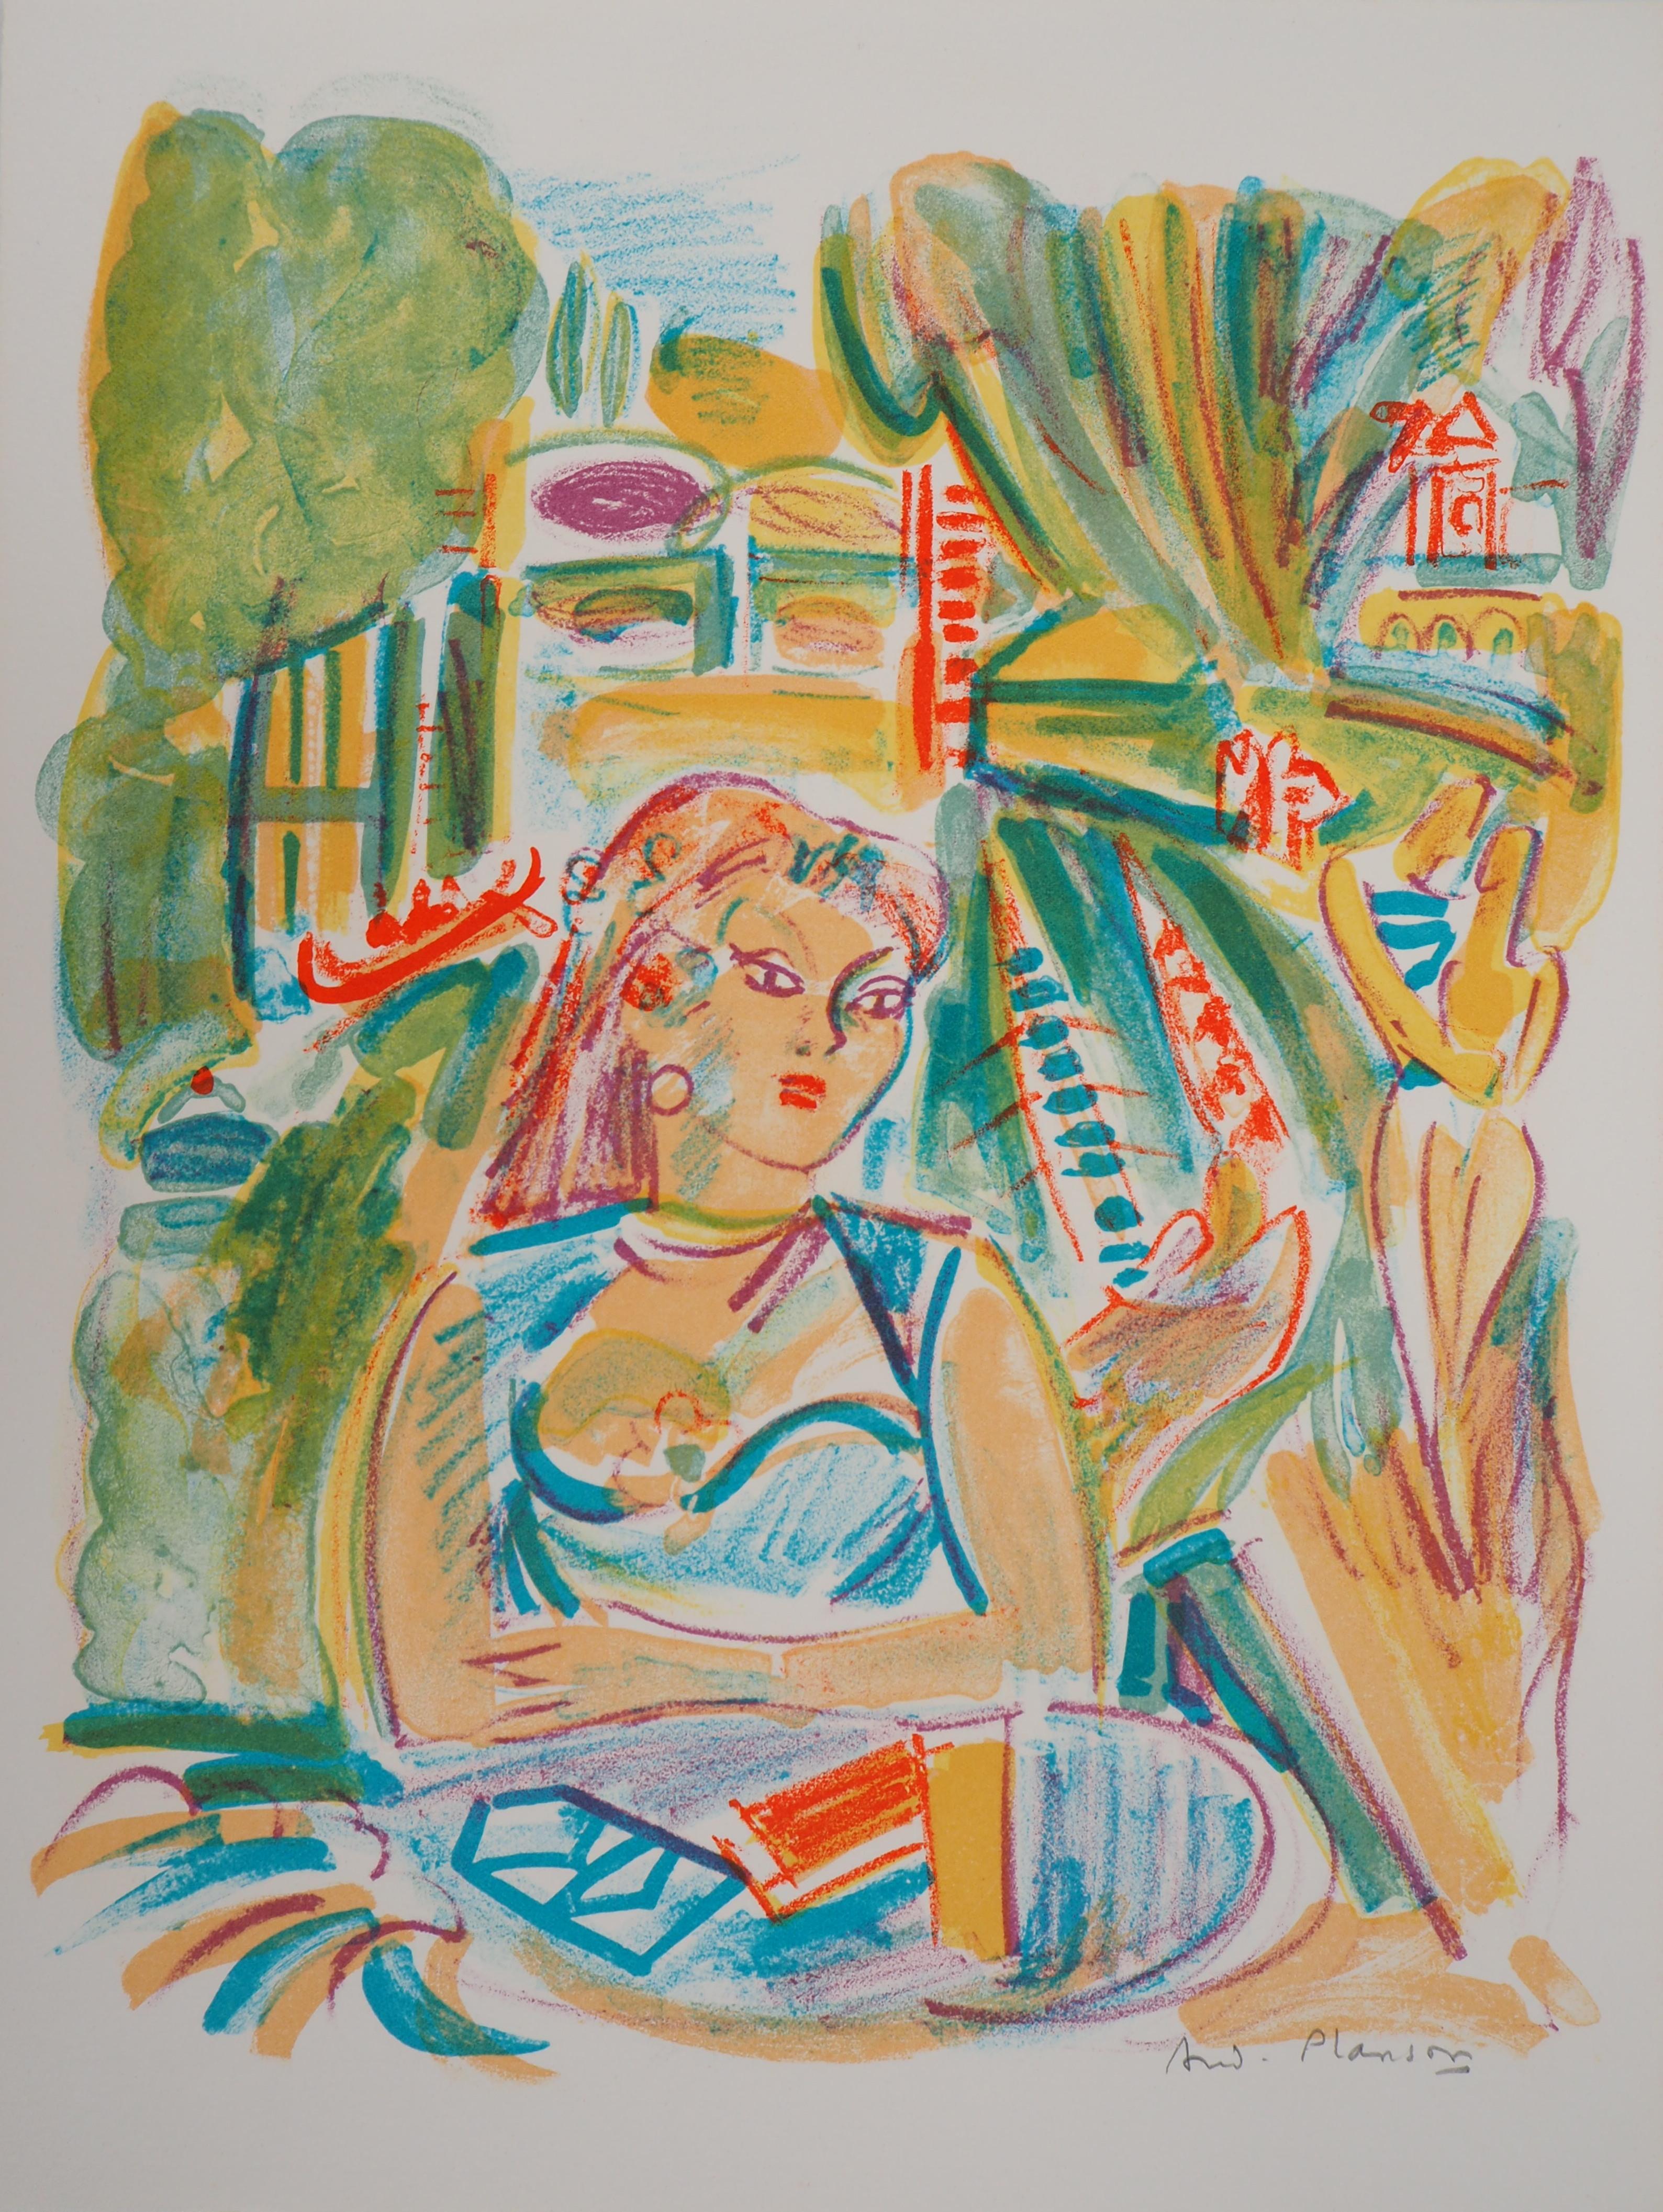 Sunny Day : Young Girl in the Garden - Original handsigned lithograph